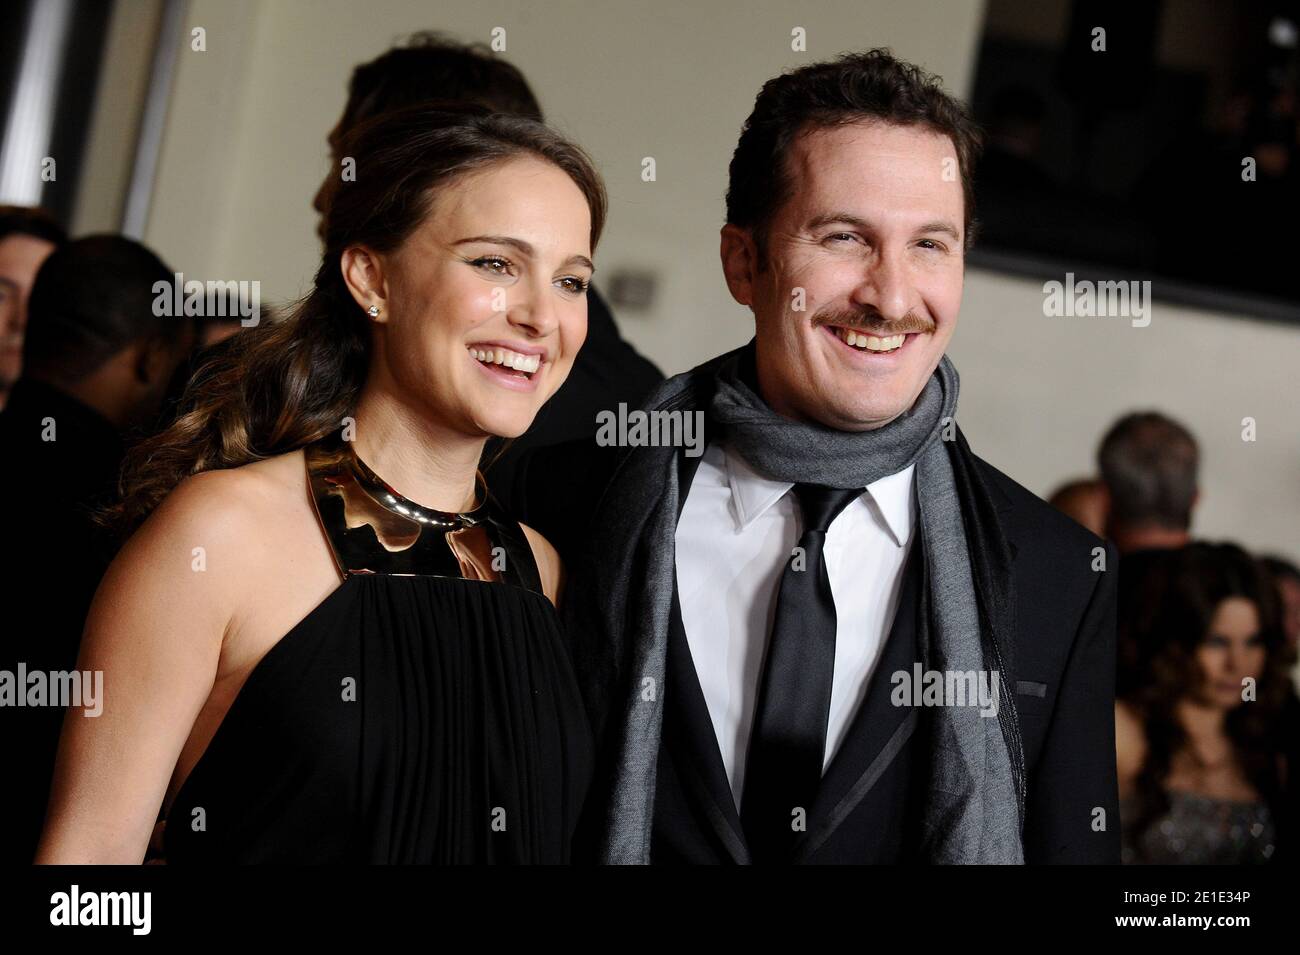 Natalie Portman and Darren Aronofsky arrive at the 63rd Annual DGA Awards at the Grand Ballroom at Hoywood & Highland. Los Angeles, January 29, 2011. Photo by Lionel Hahn/AbacaUsa.com Stock Photo